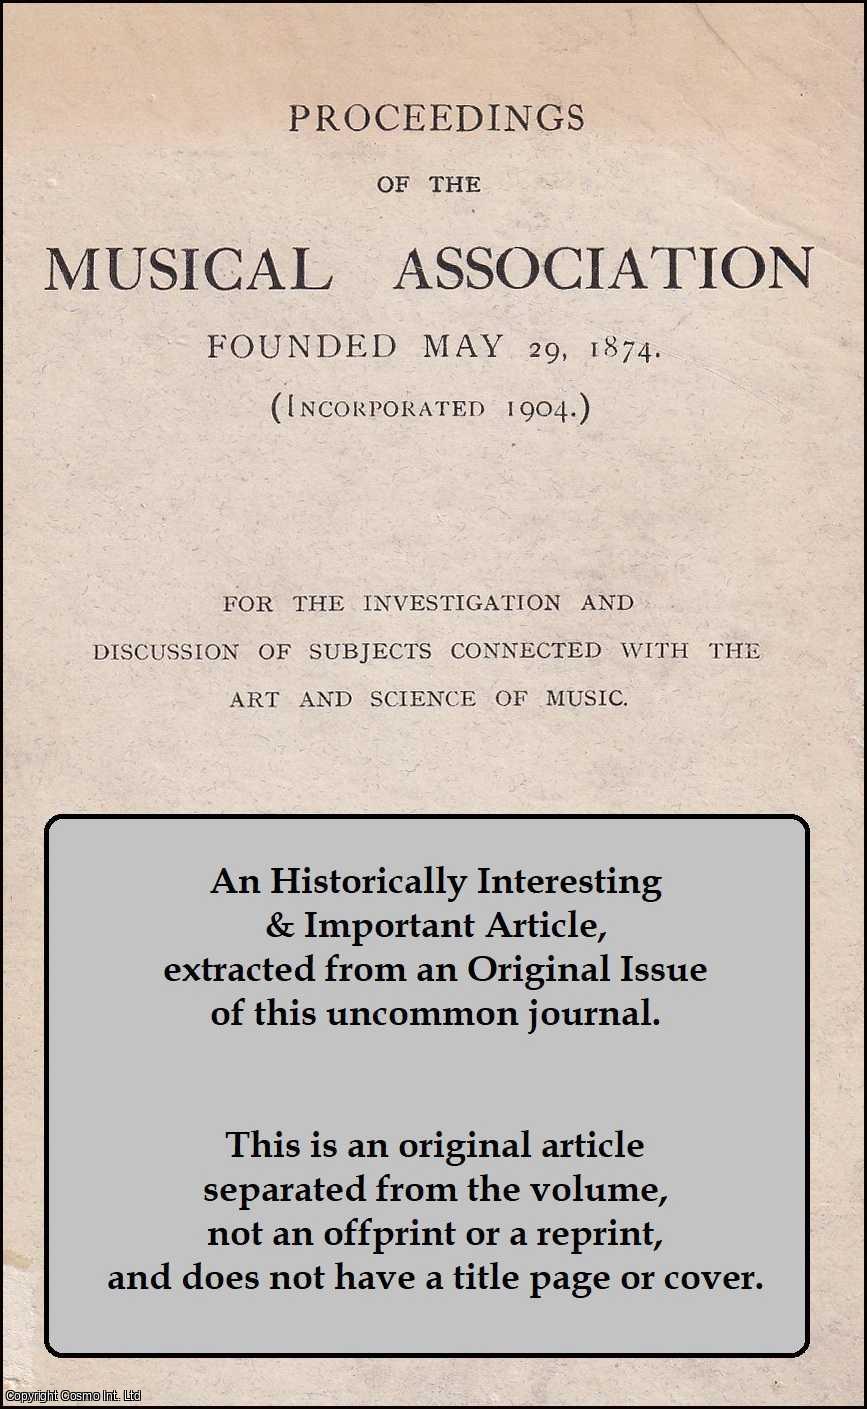 E. Lancaster Jones - Sound-Ranging. An original article from The Proceedings of The Musical Association, 1922.